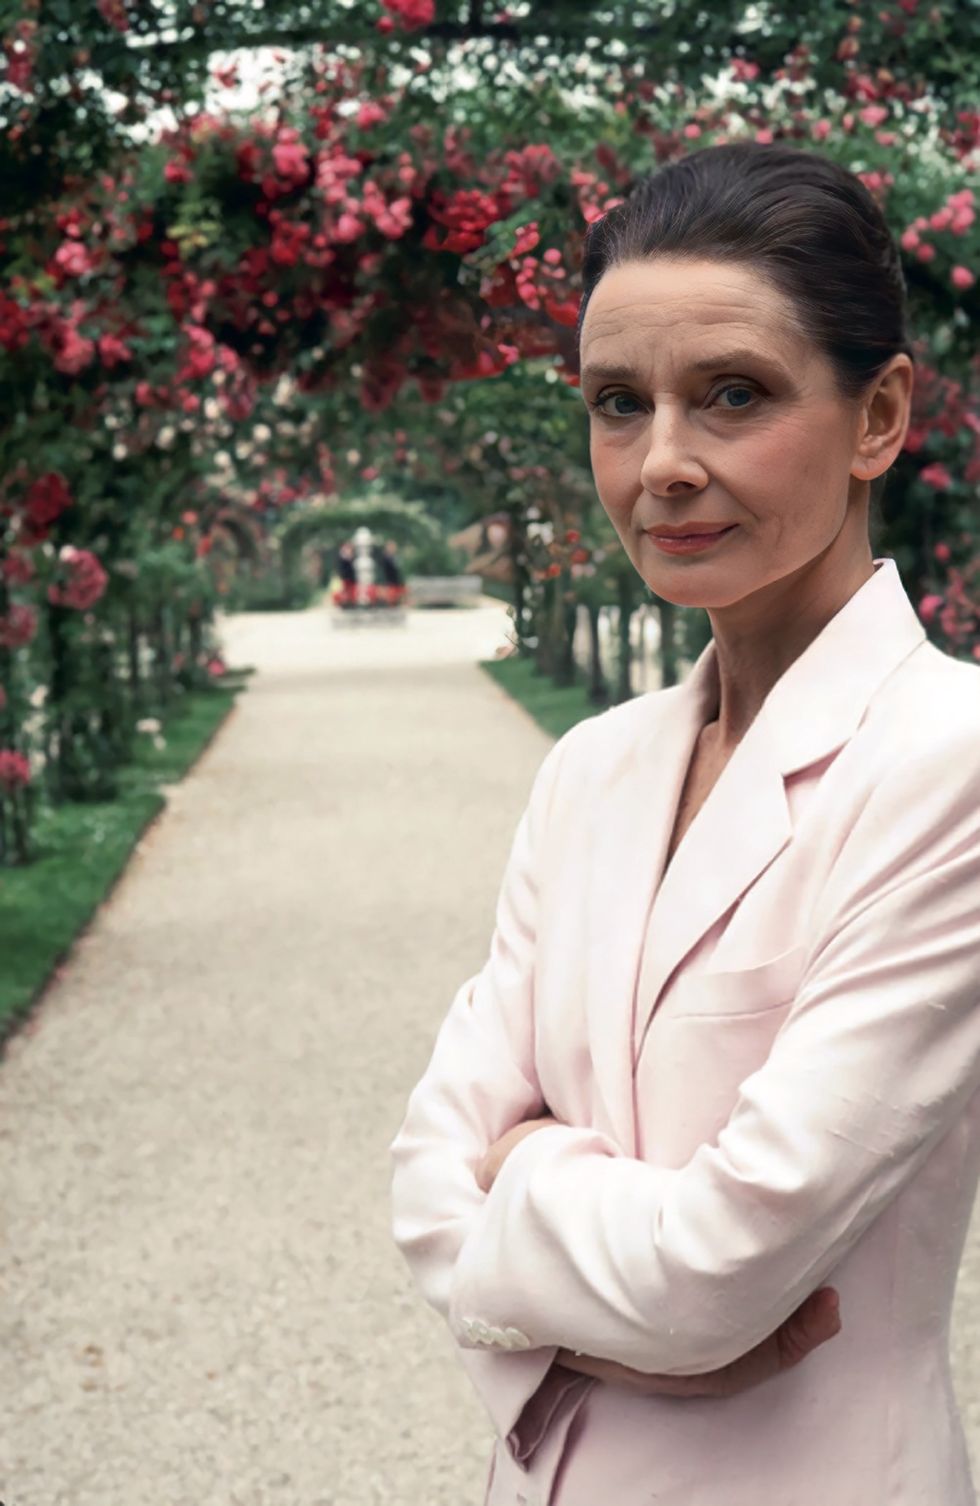 audrey at the french rose garden, la roseraie de l hay, for gardens of the world with audrey hepburn